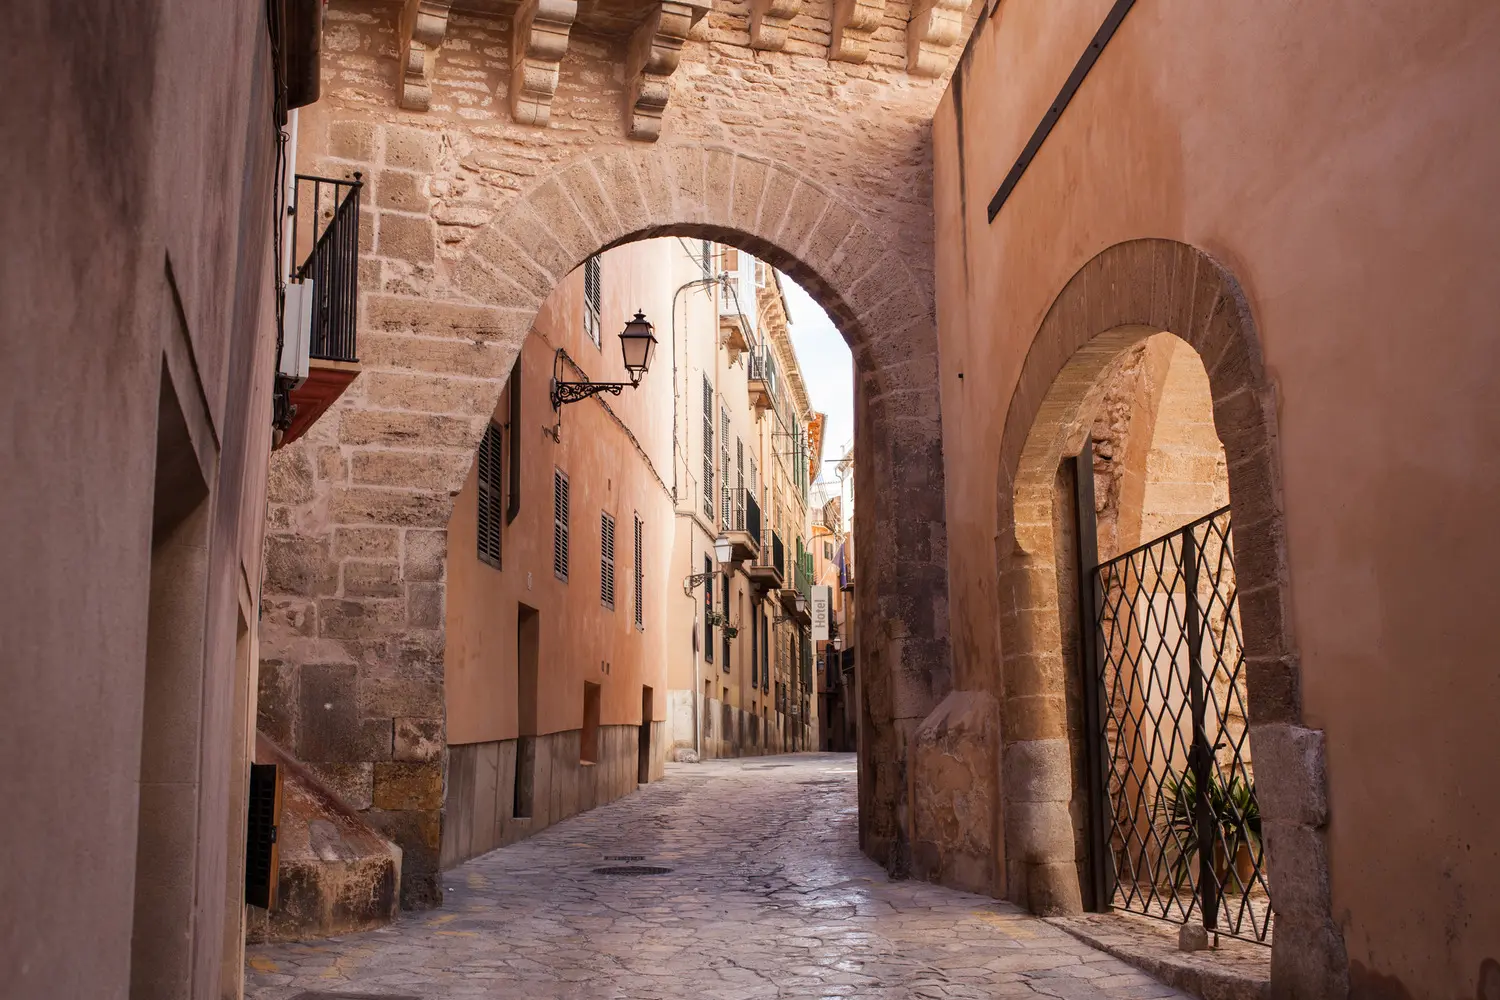 Stone arch and a narrow cobbled lane in Palma de Mallorca's Old Town